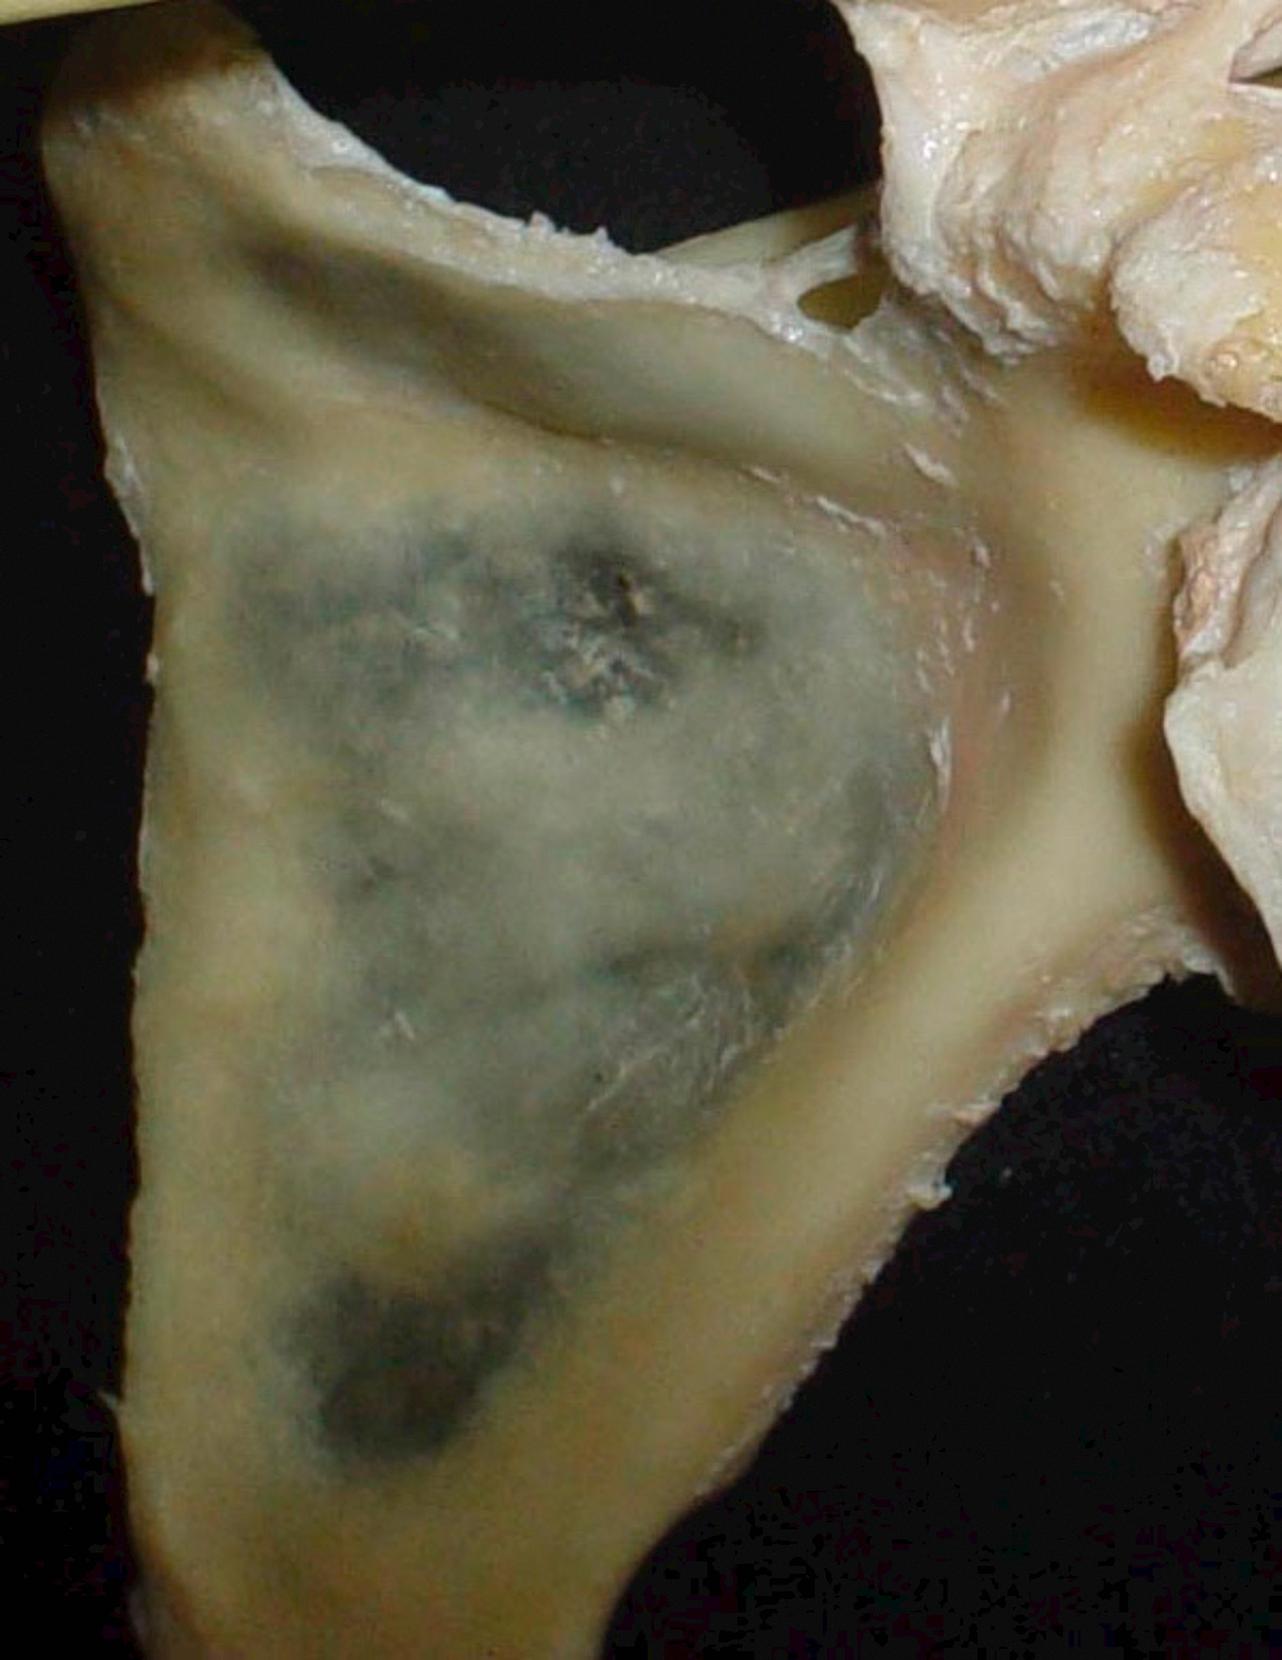 Fig. 16.10, This image is an anterior view of a scapula denuded of its musculature, revealing the bony opportunities for fixation. The vertebral medial border is only approximately 8-mm thick, while the lateral border provides about 14 mm. The glenoid yields approximately 30 mm at the subchondral bone but transitions quickly through the scapular neck to the translucent body.